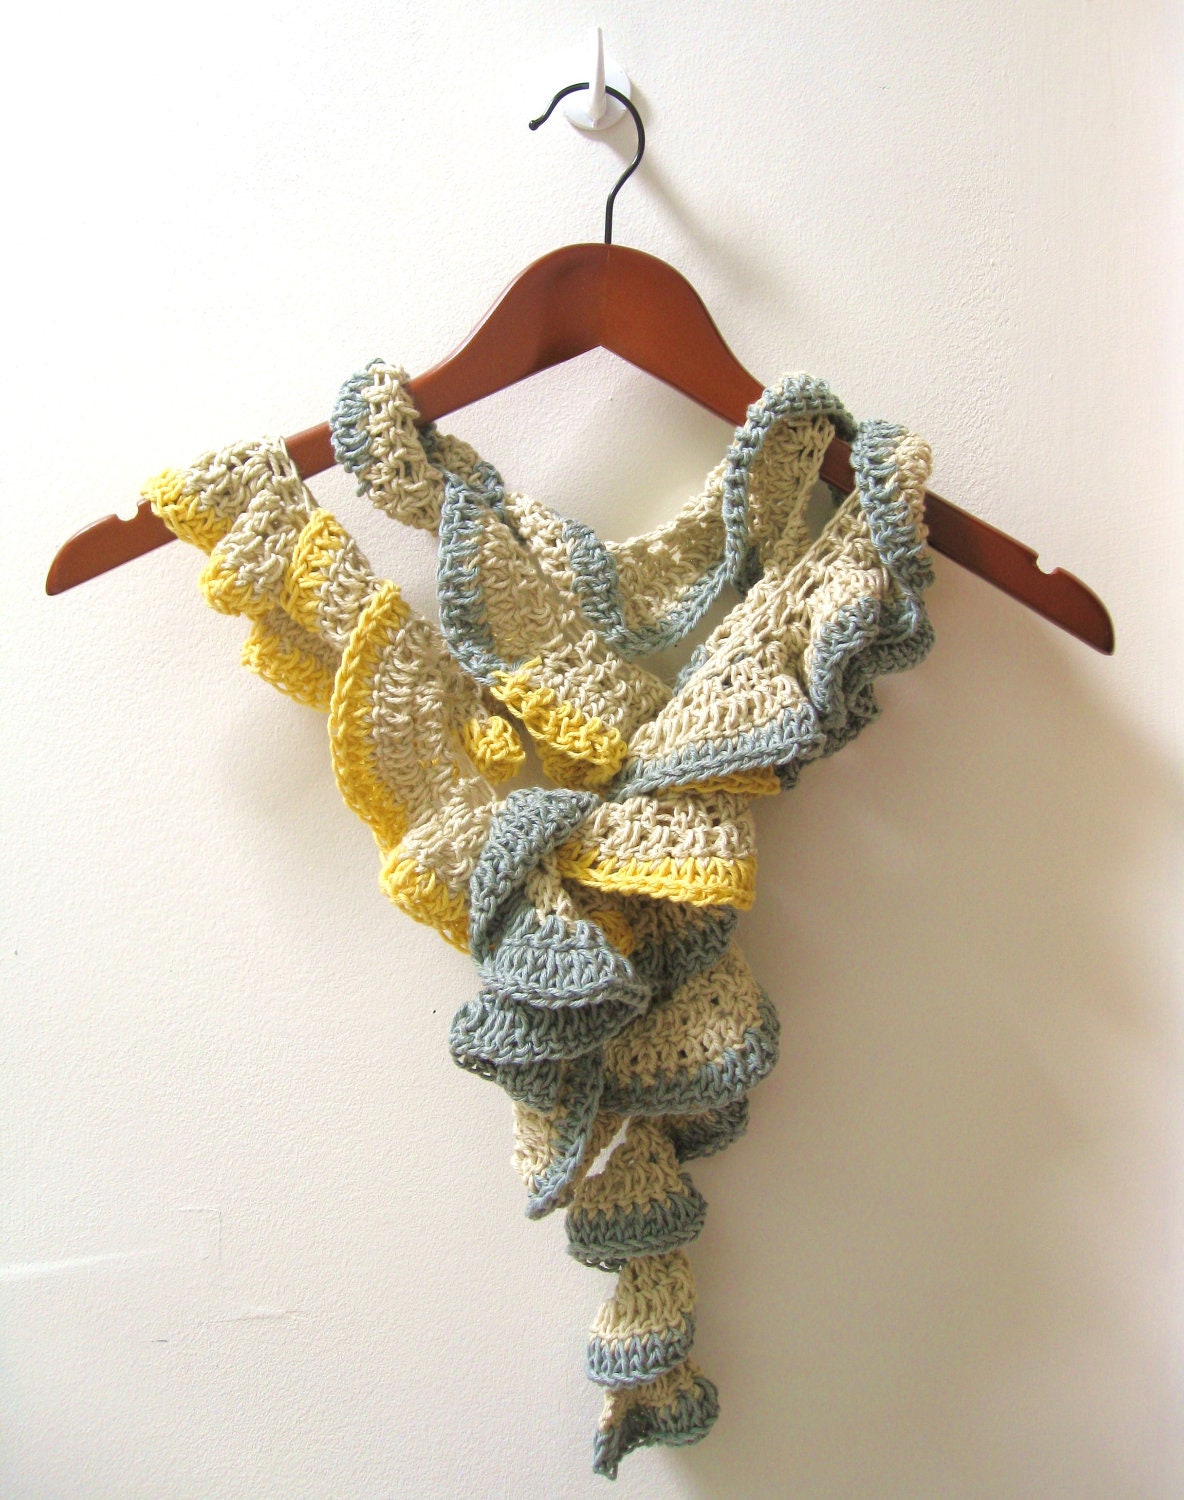 Ruffle Scarf - Crochet Scarf - The Ruffle Scarf - Cotton Merino - Neutral Colorblock - One of a Kind - meganEsass